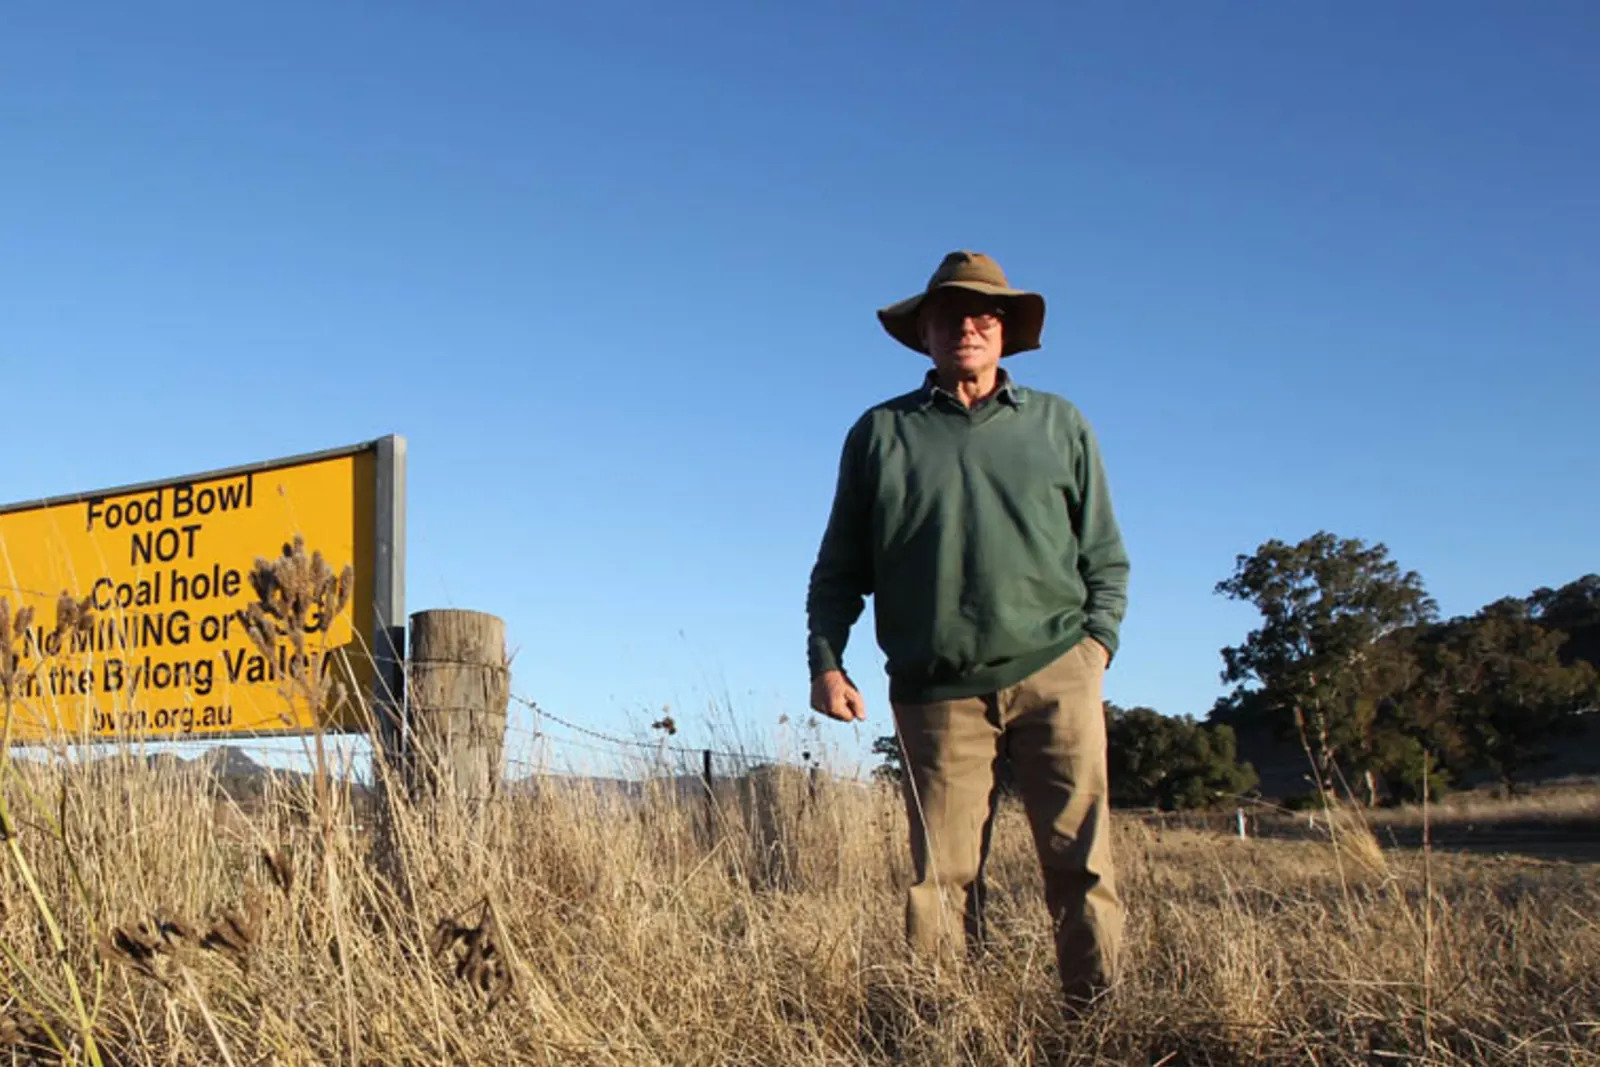 The court’s decision to dismiss the appeal was welcomed by farmers and other groups opposed to a new open-cut mine in the farming region near Mudgee.